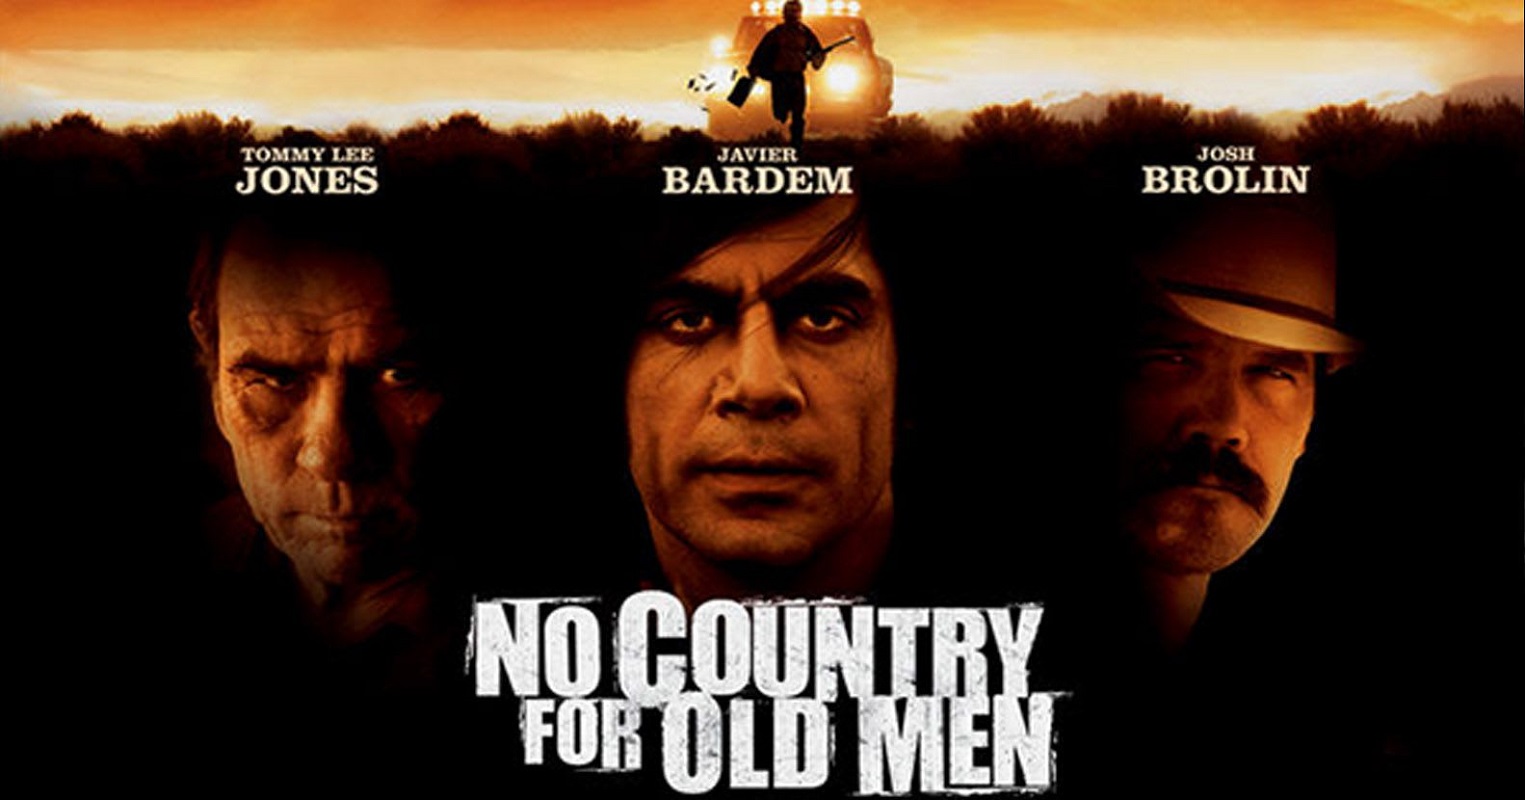 Име:  no country for old men.jpg
Разглеждания: 89
Размер:  169,6 КБ